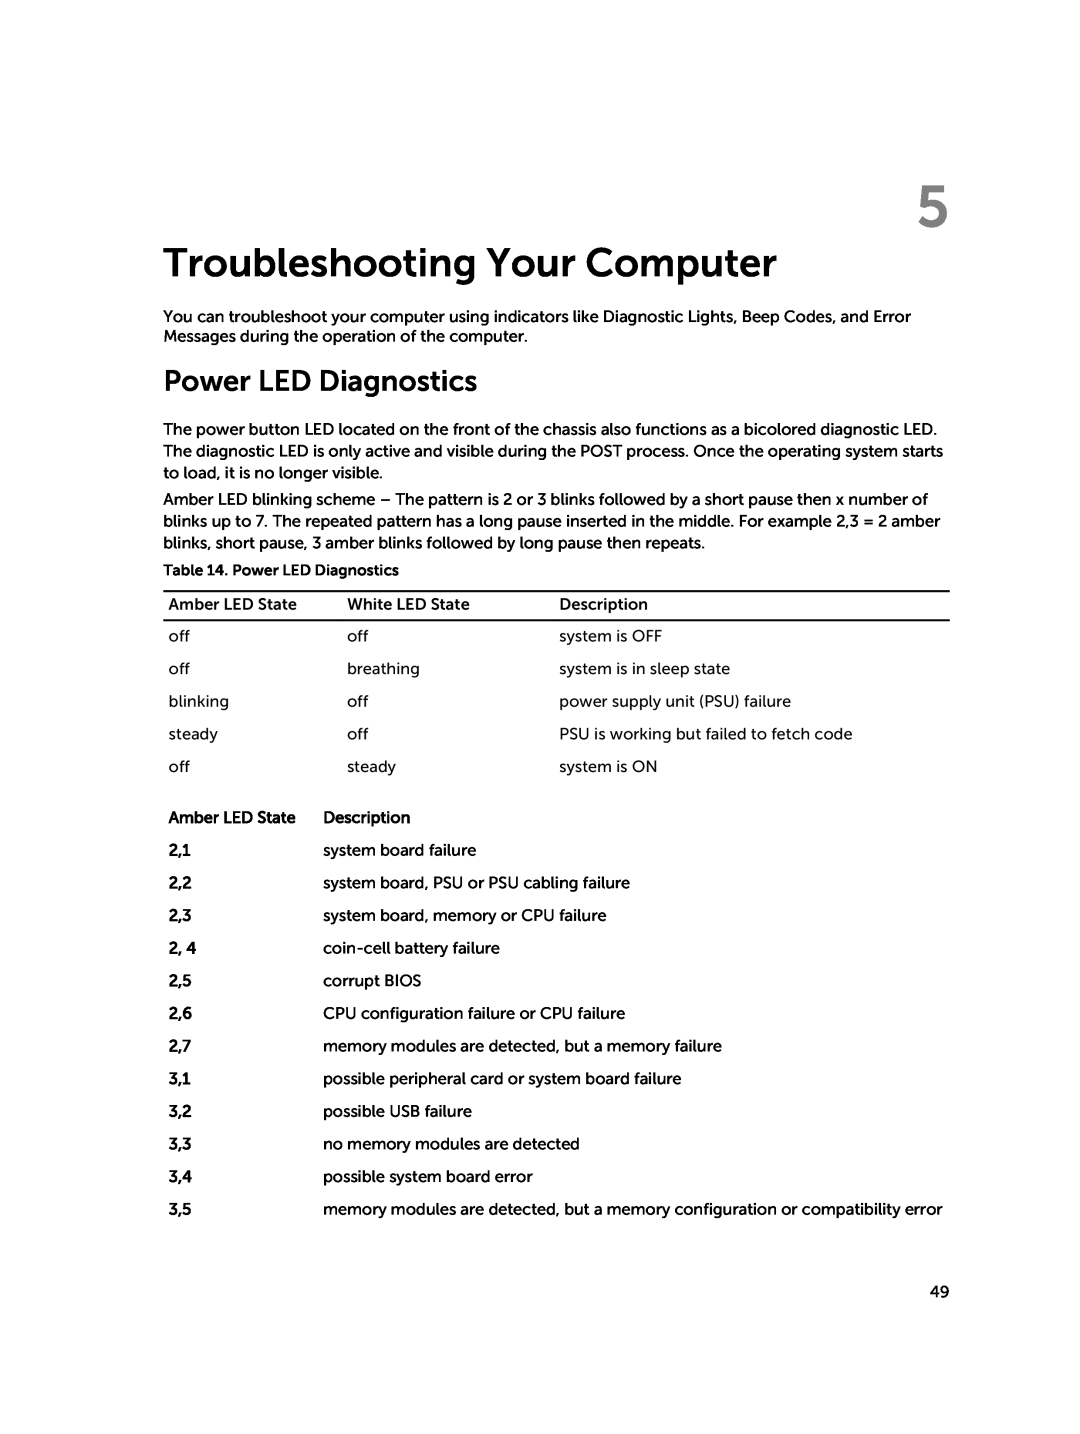 Dell D15M owner manual Troubleshooting Your Computer, Power LED Diagnostics, Amber LED State, Description 